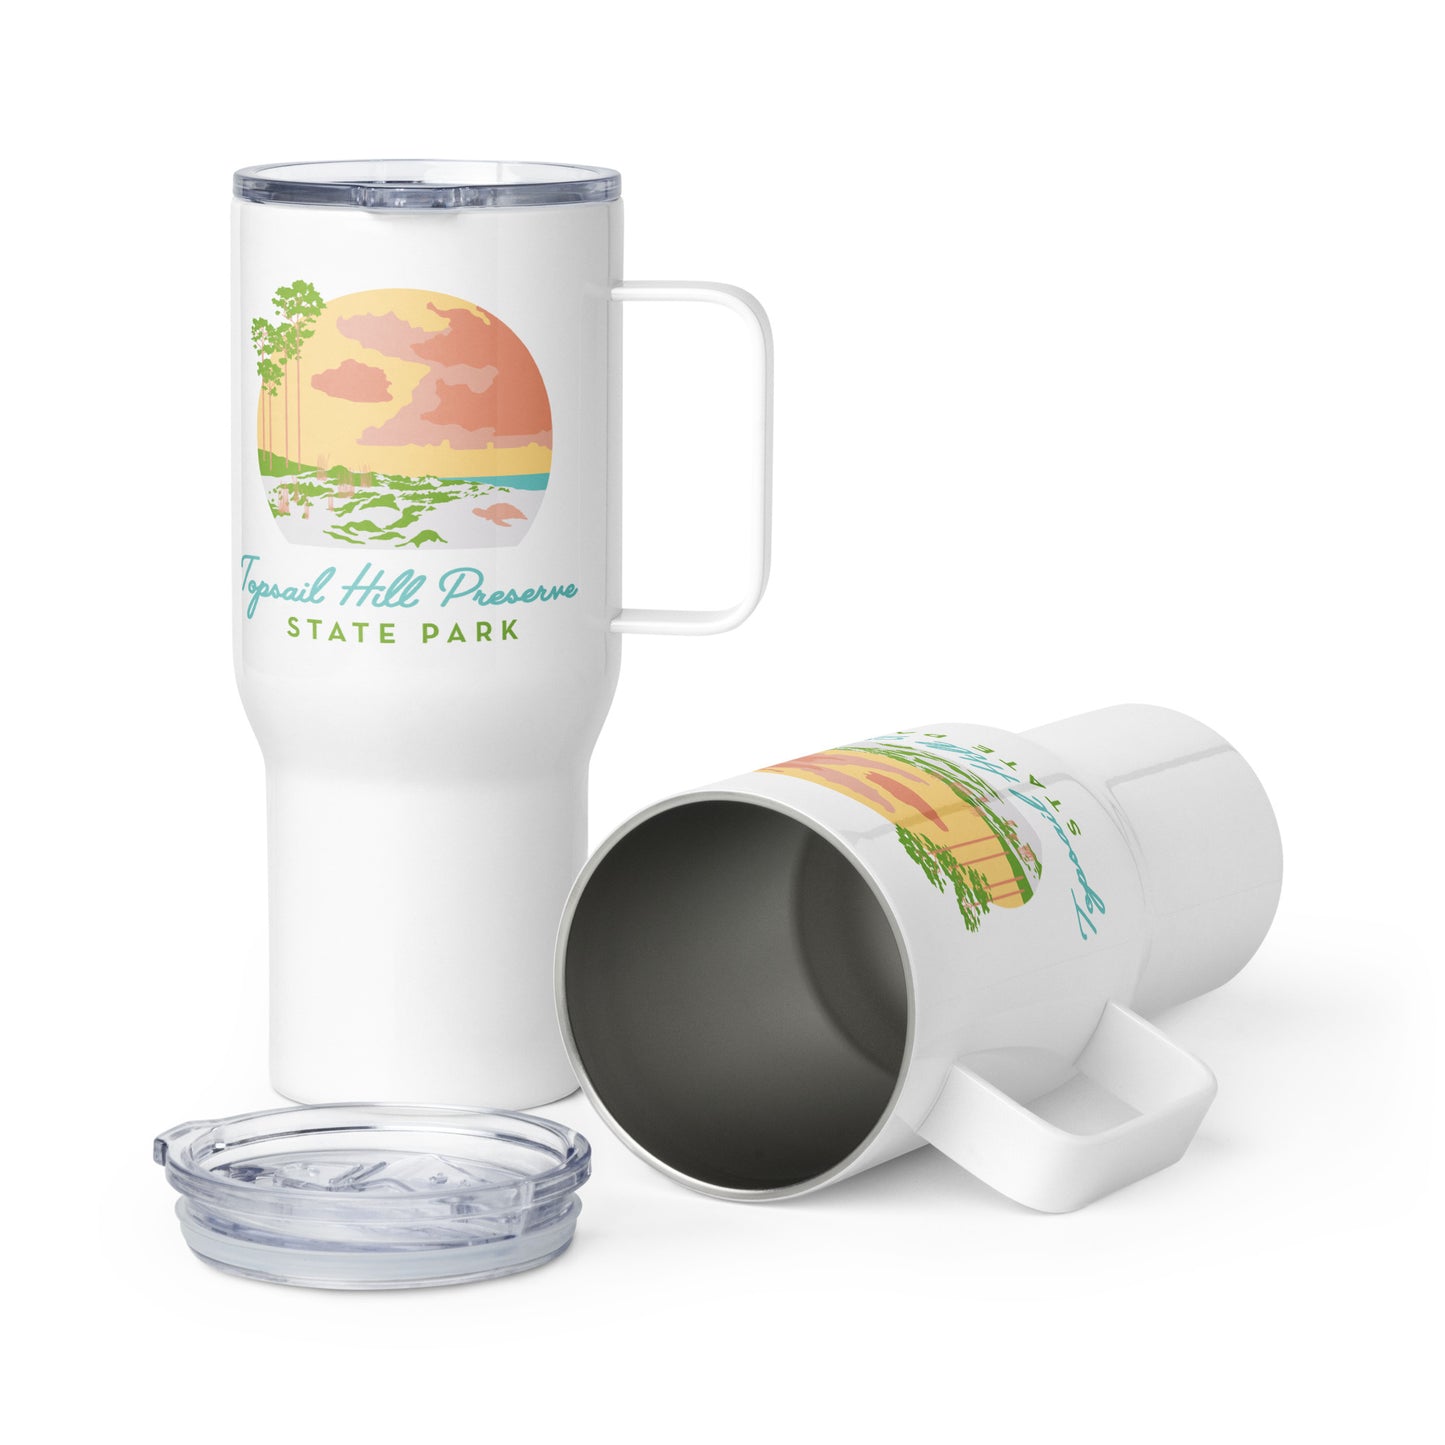 Topsail Hill Preserve 25 oz Travel Tumbler by AMLgMATD - Live Wildly 